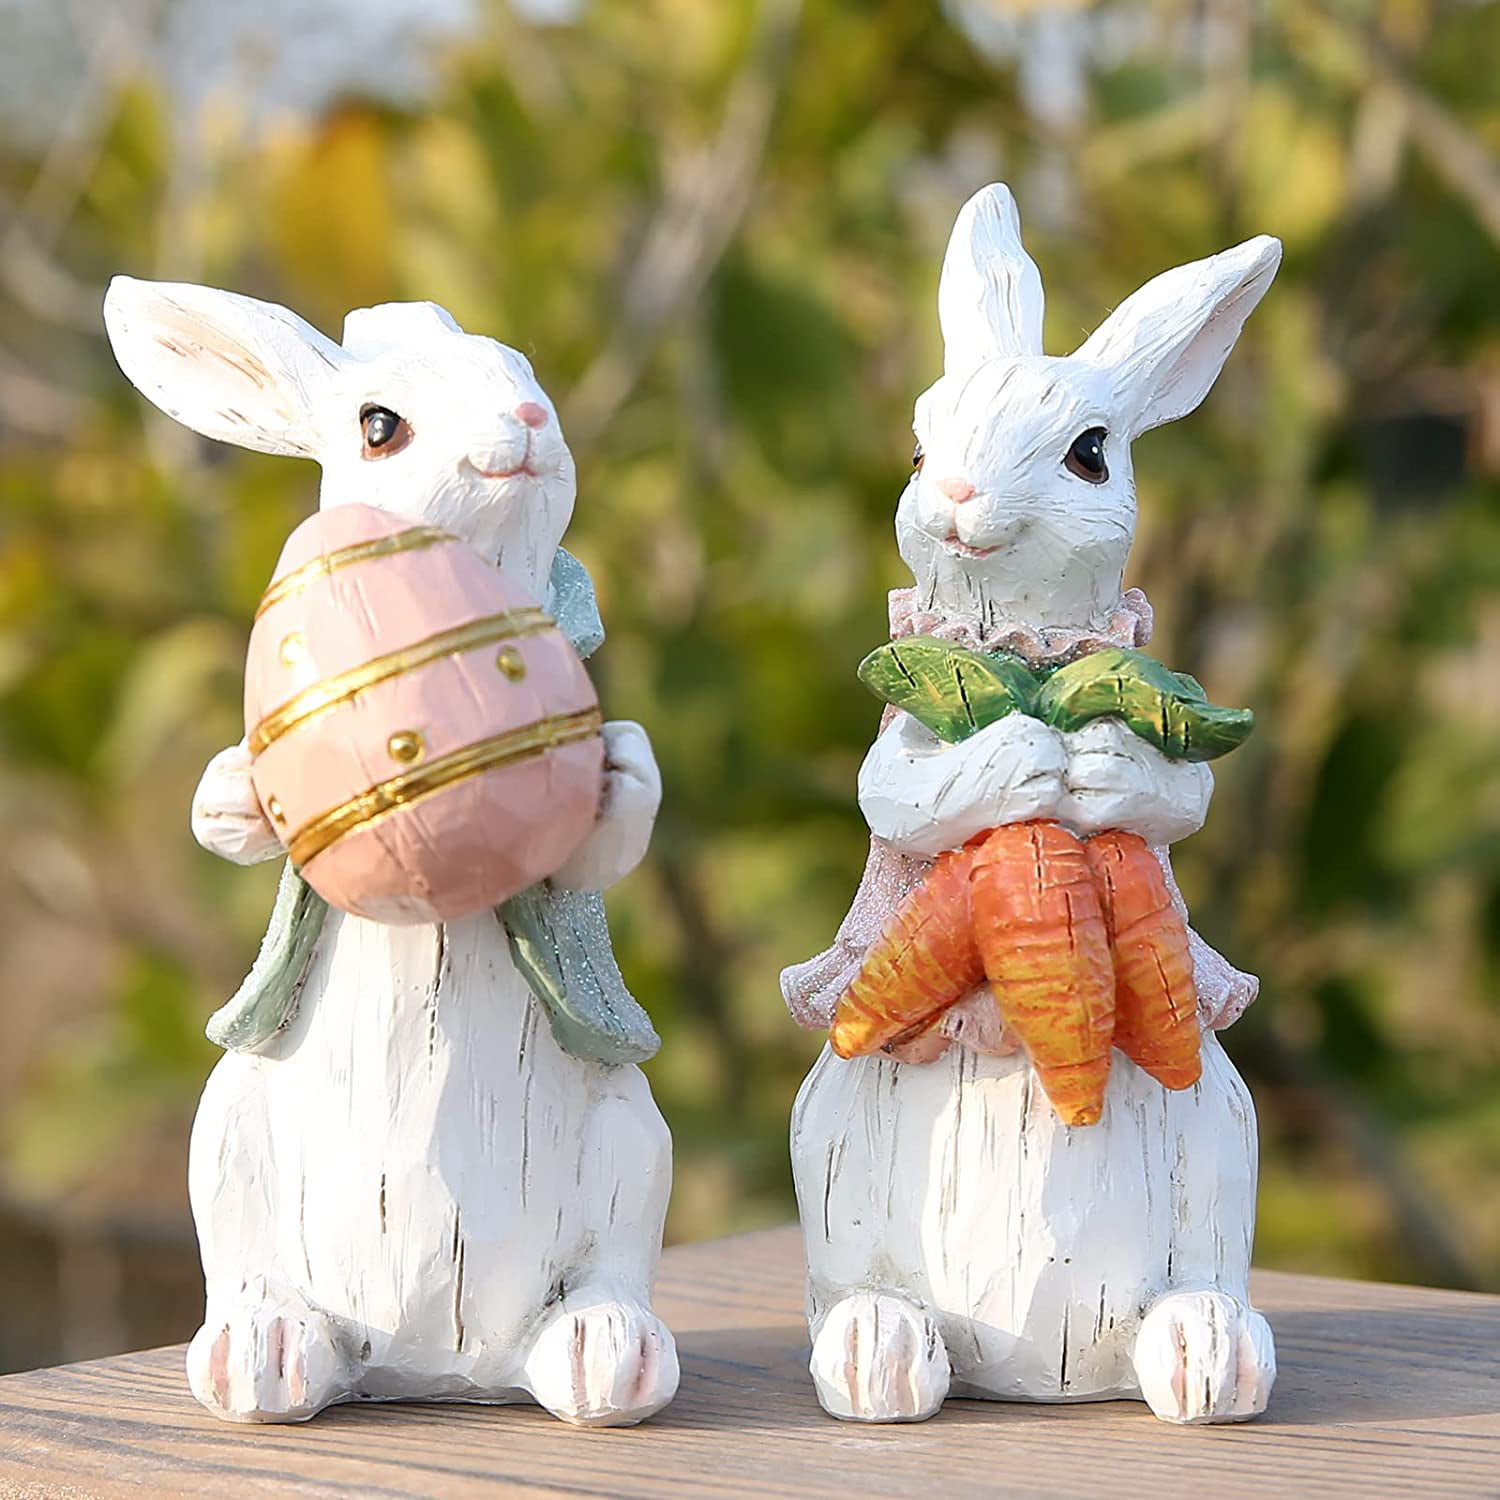 2022 New Home Ornament Minimalist Holiday Art Small Easter Bunny Statue Unique Resin Gift Idea Modern Animal Craft Easter Egg Sculpture